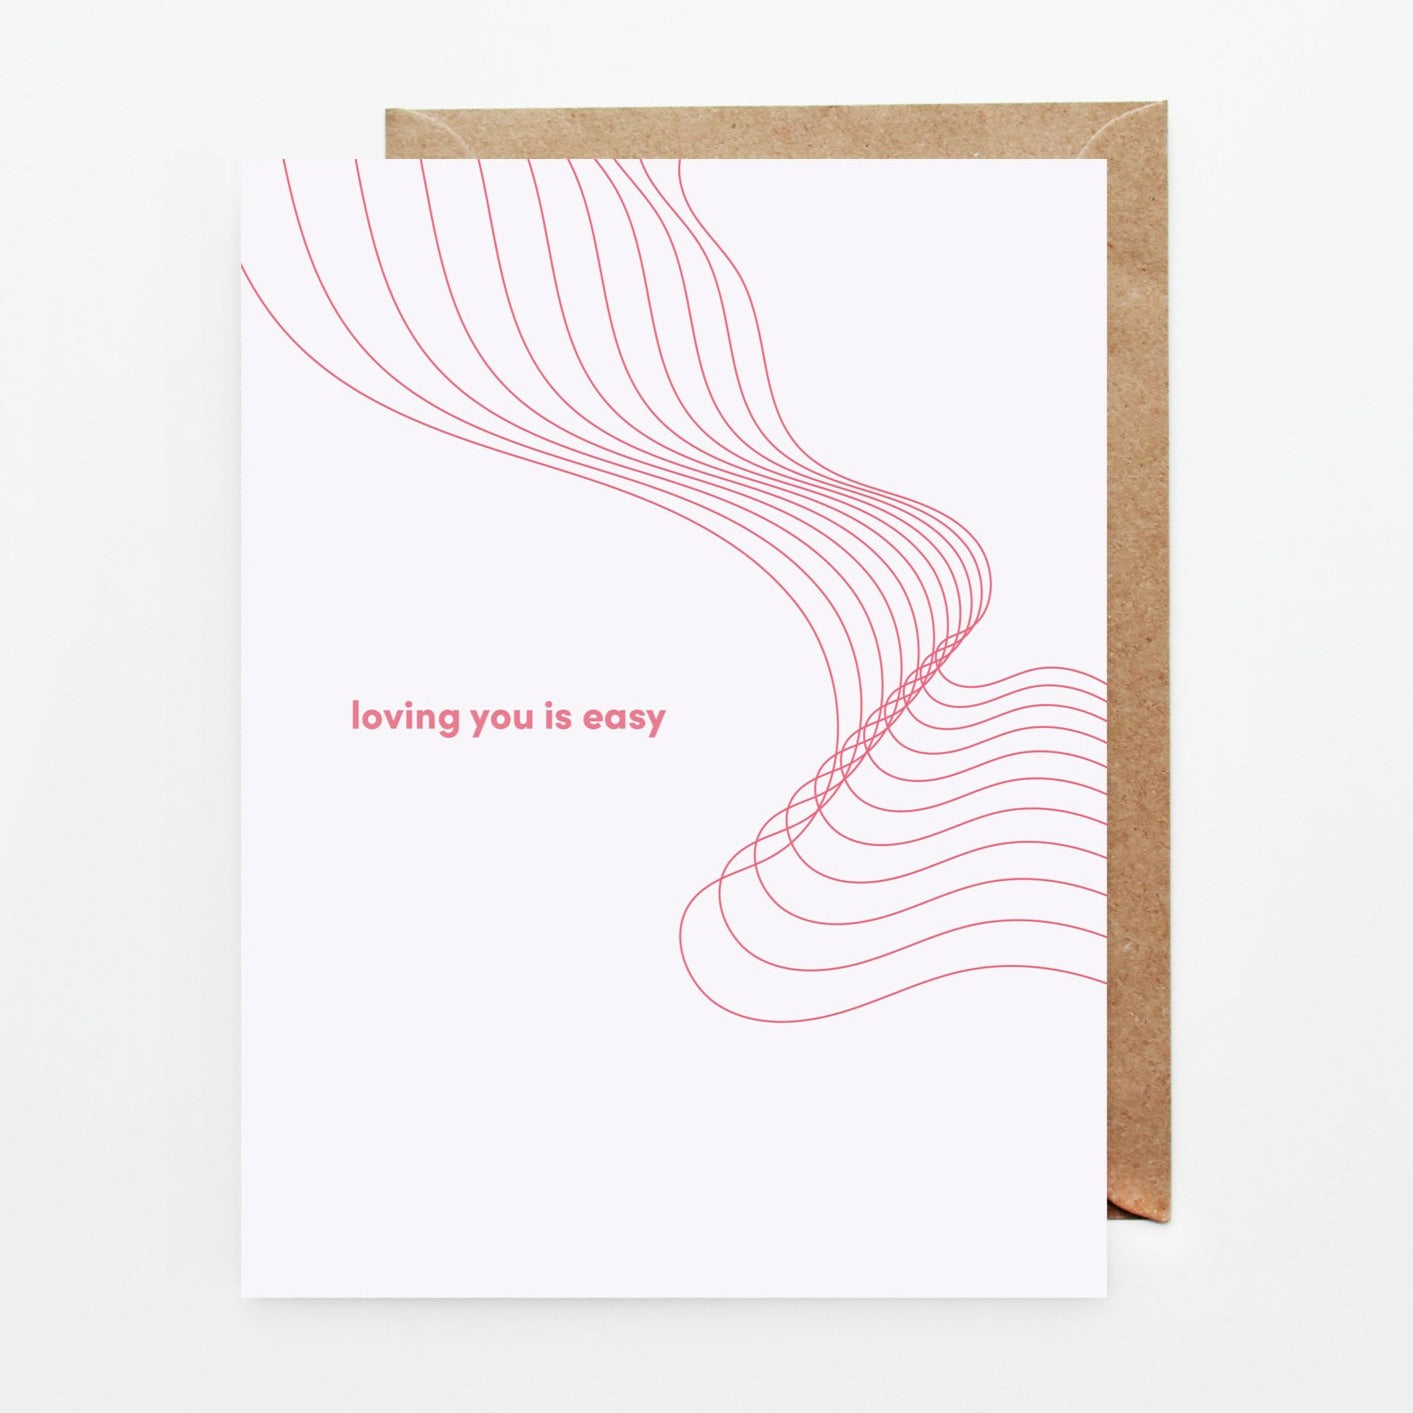 Dark pink curved line graphic and text on light pink background. Hand drawn 4.25" x 5.5" print greeting card. Loving You is Easy Card by Slow North